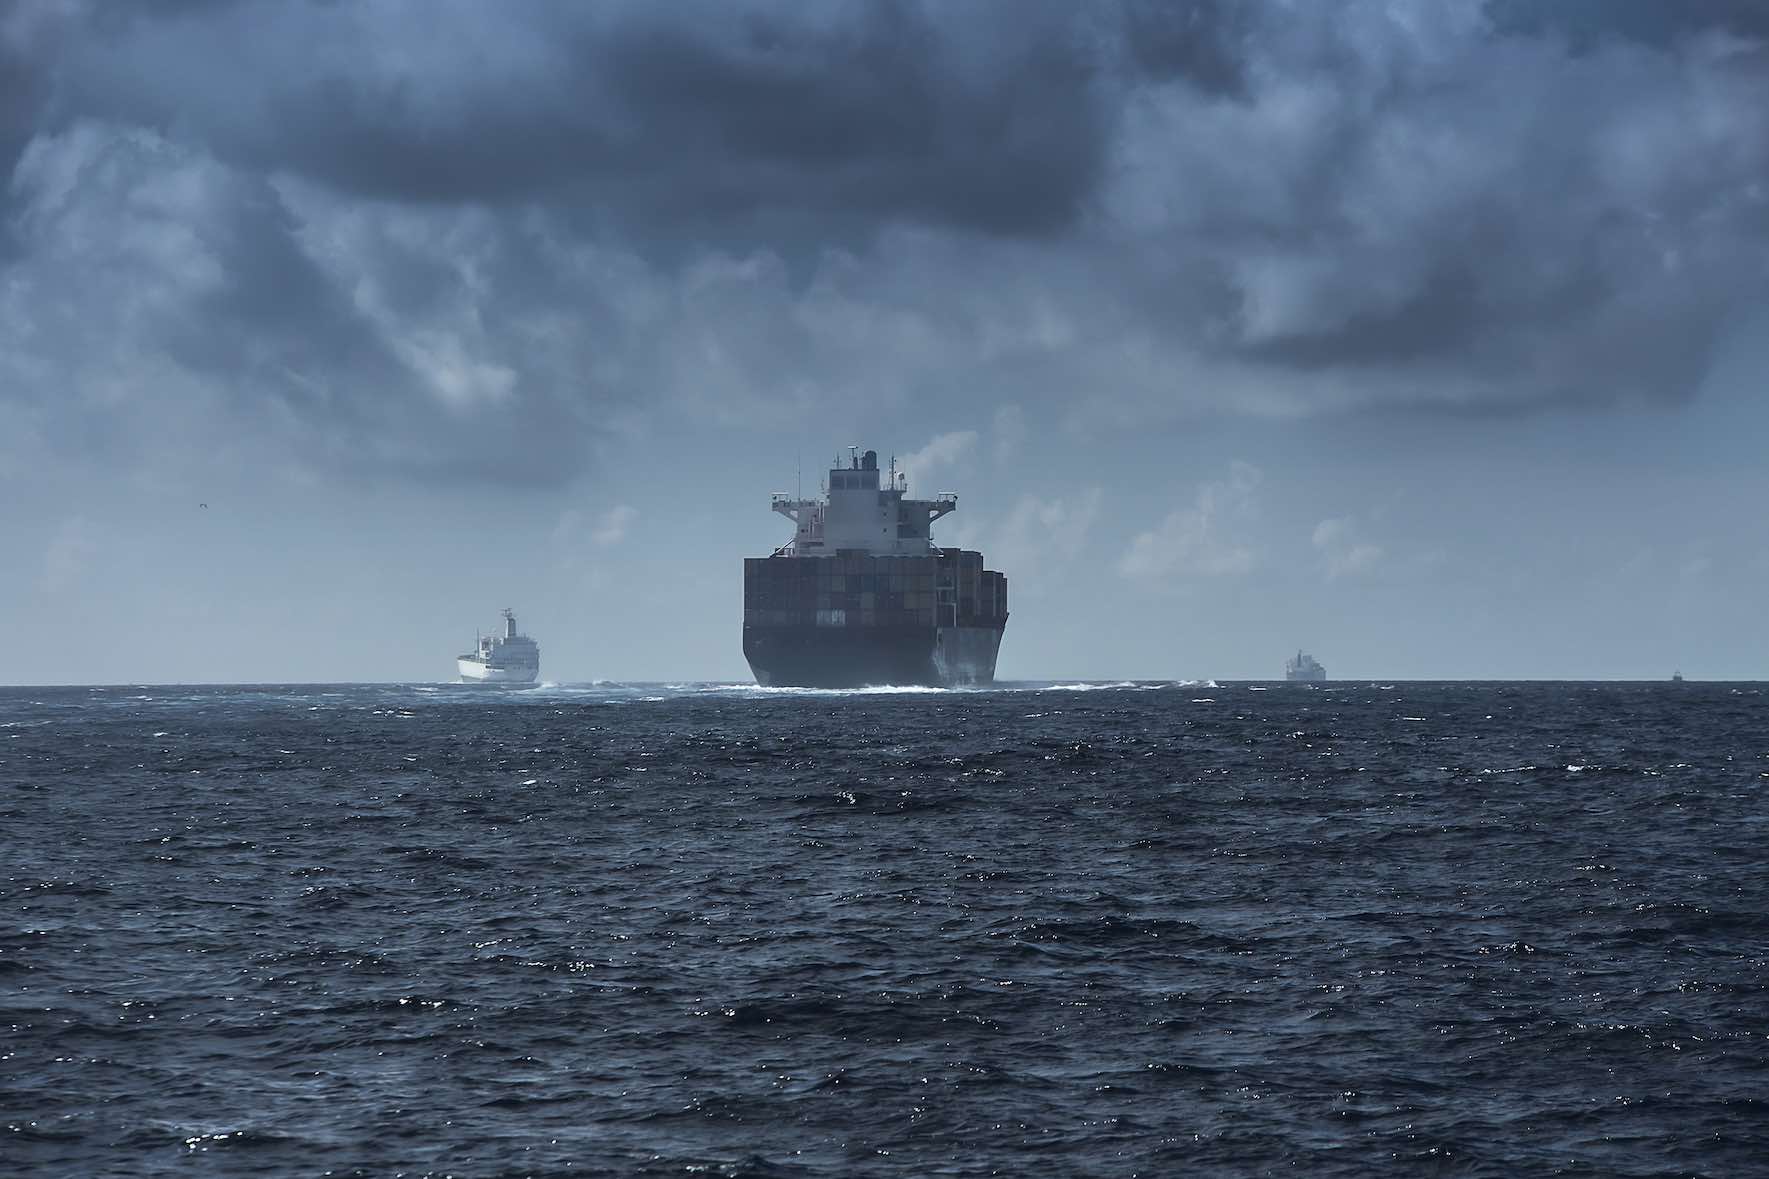 We see the stern of a cargo ship as it heads out the ocean, the weather looks rough. The picture has a blueish tint. 